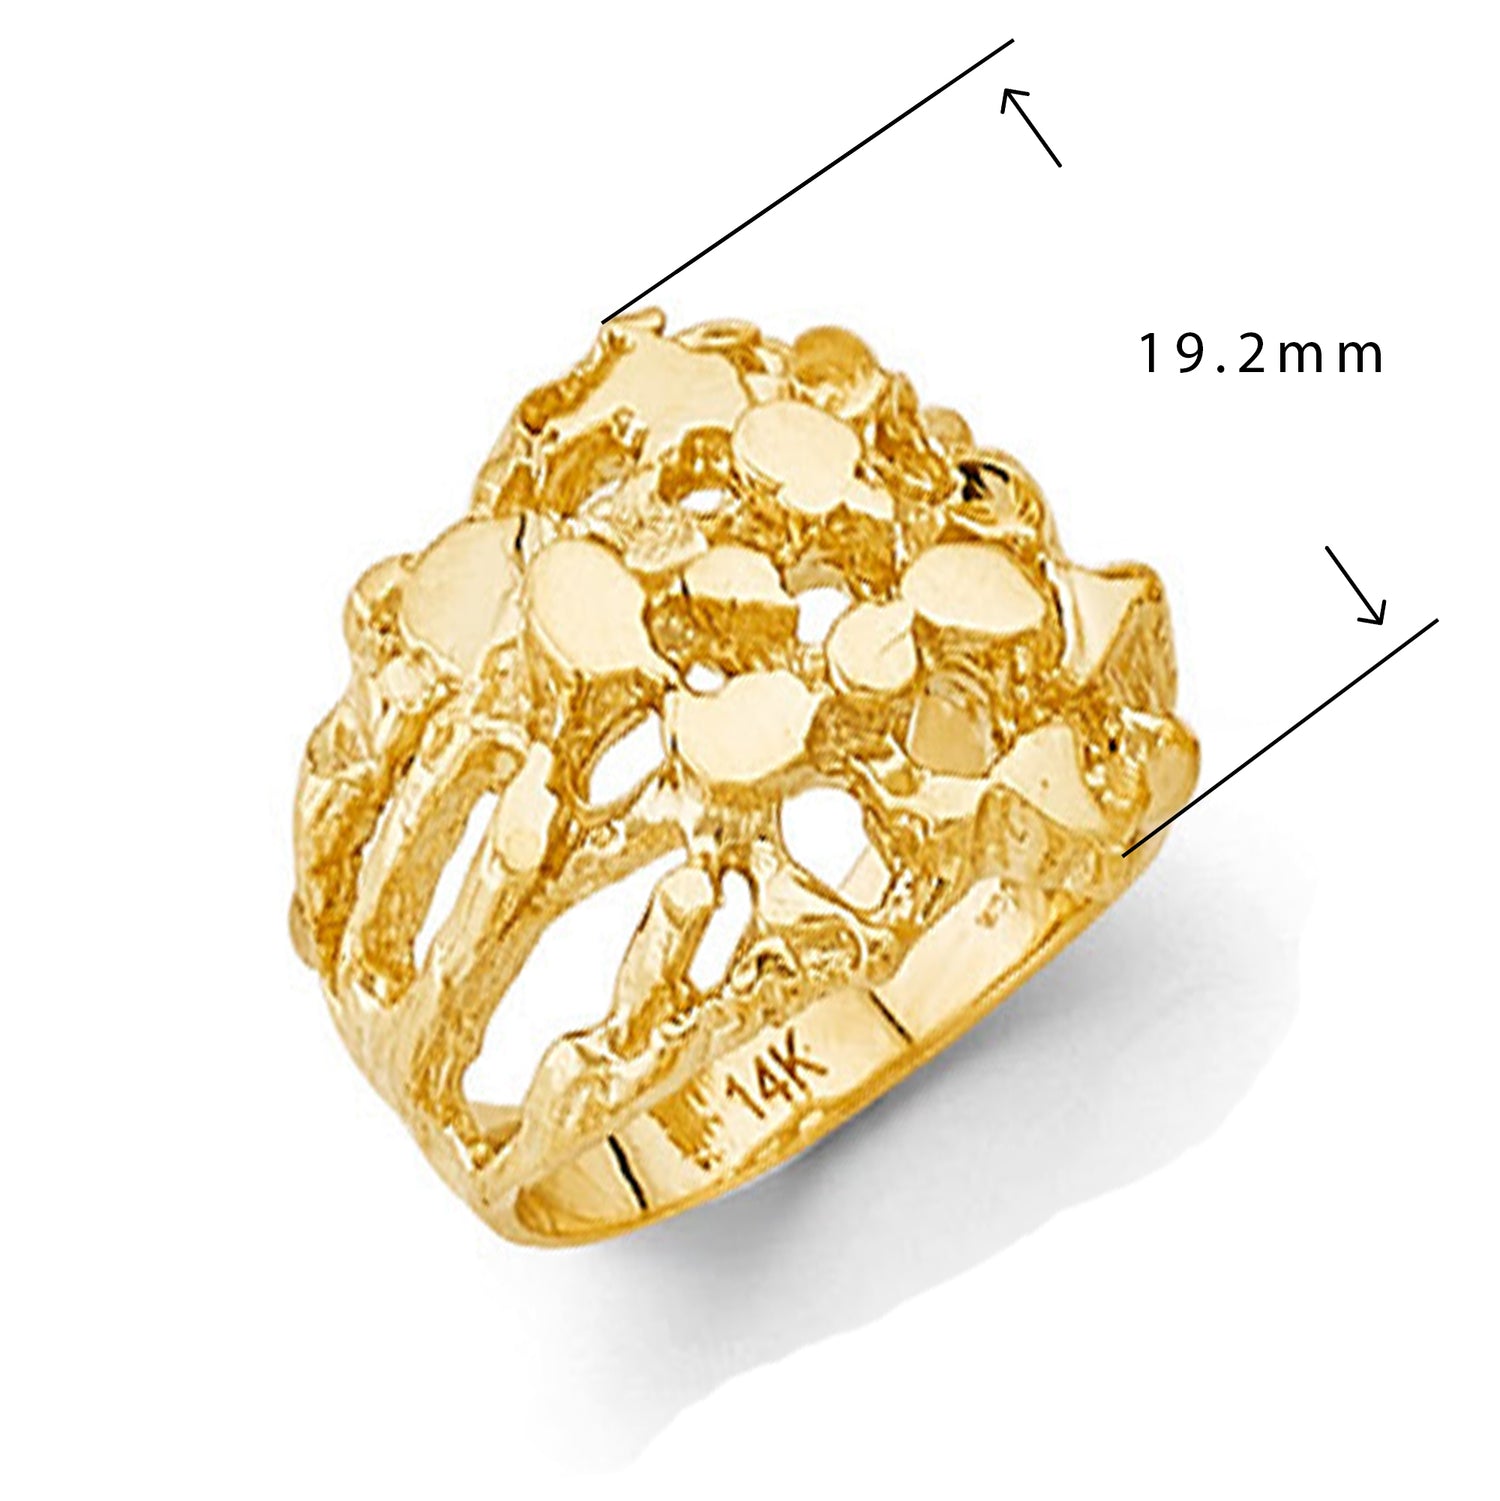 Asymmetrical Adult Nugget Ring in Solid Gold with Measurement